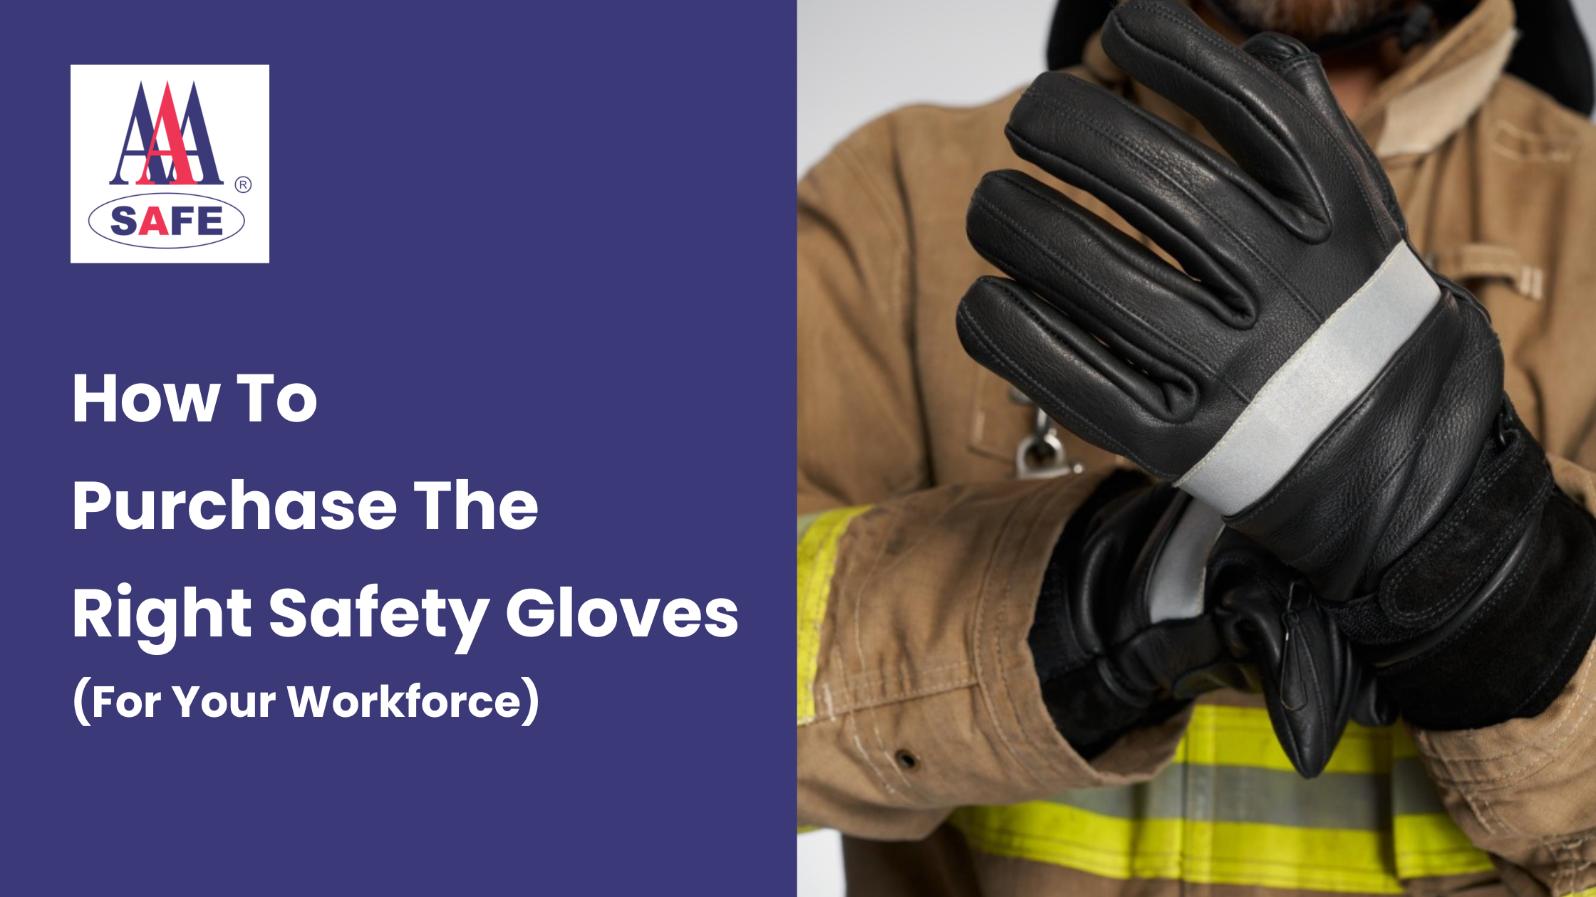 How To Purchase The Right Safety Gloves (For Your Workforce)